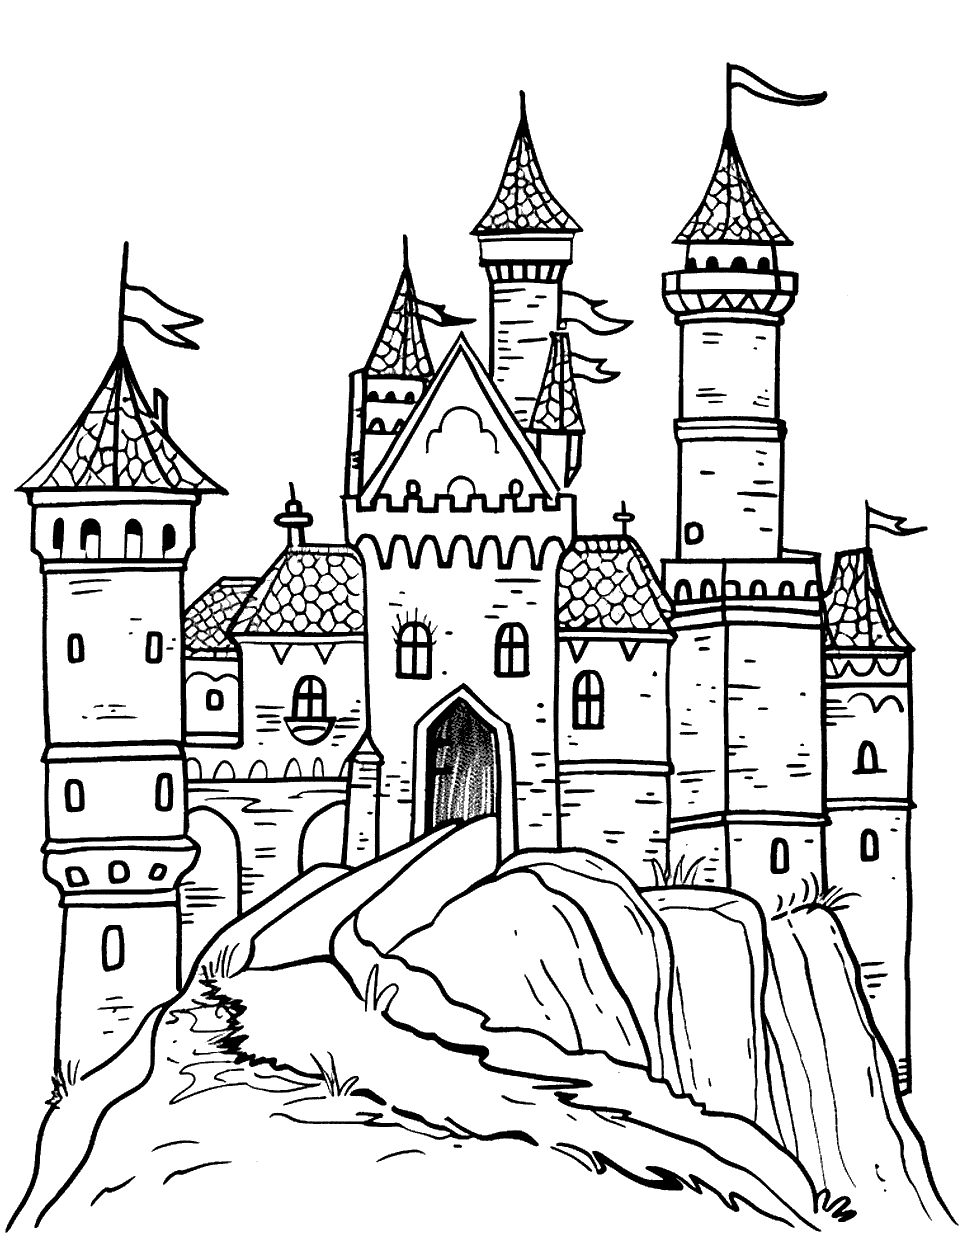 Castle on the Hill Coloring Page - A picturesque castle sitting atop a hill.